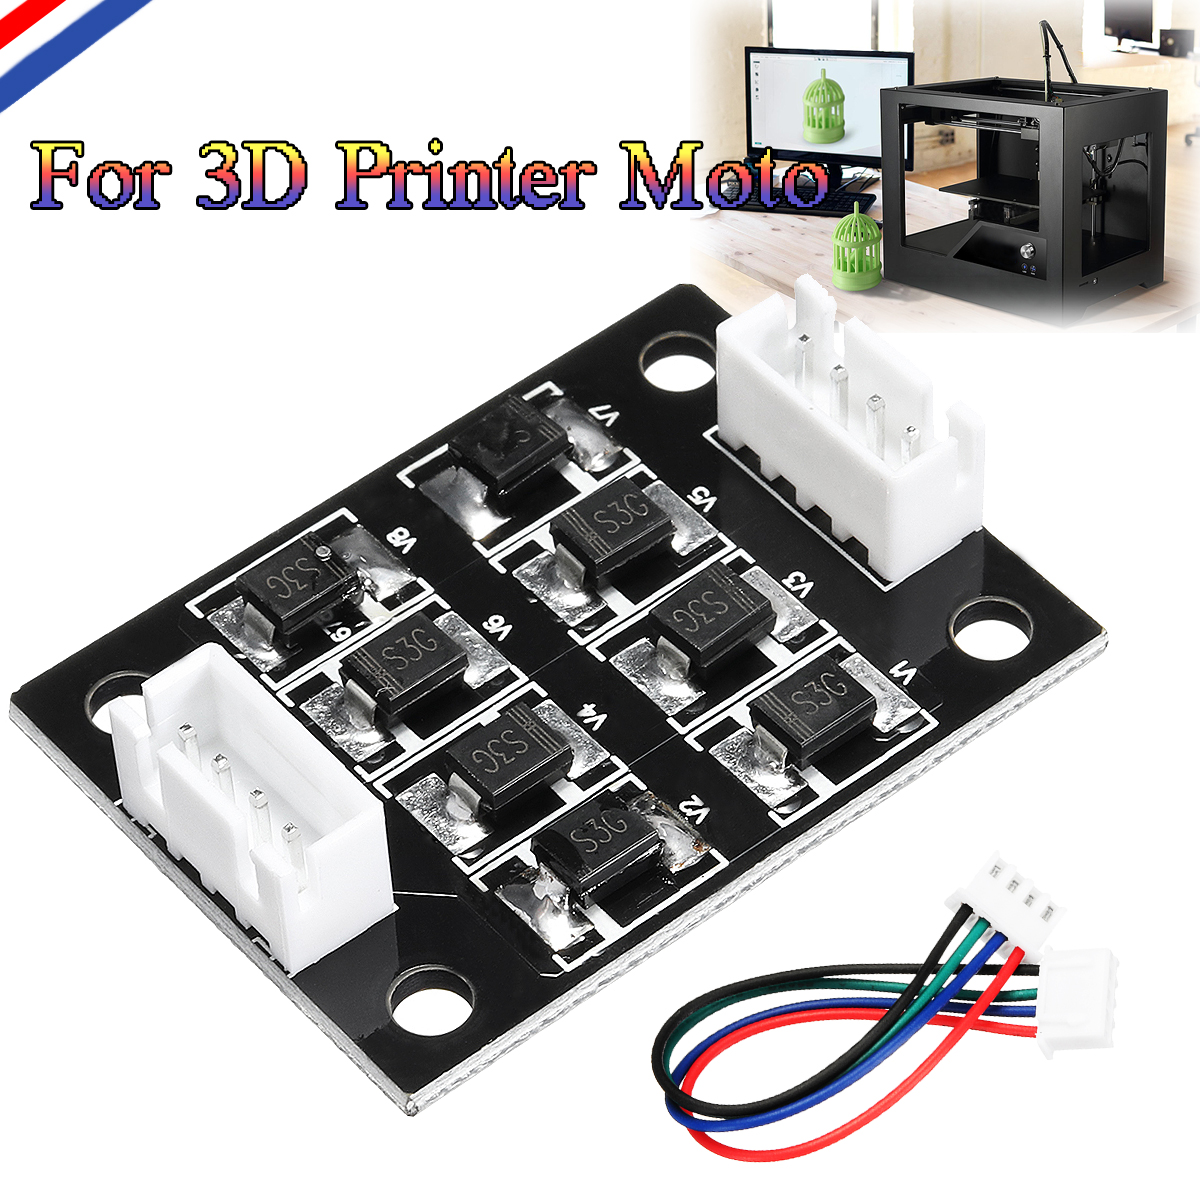 3PCS TL-Smoother Addon Module With Dupont Line For 3D Printer Stepper